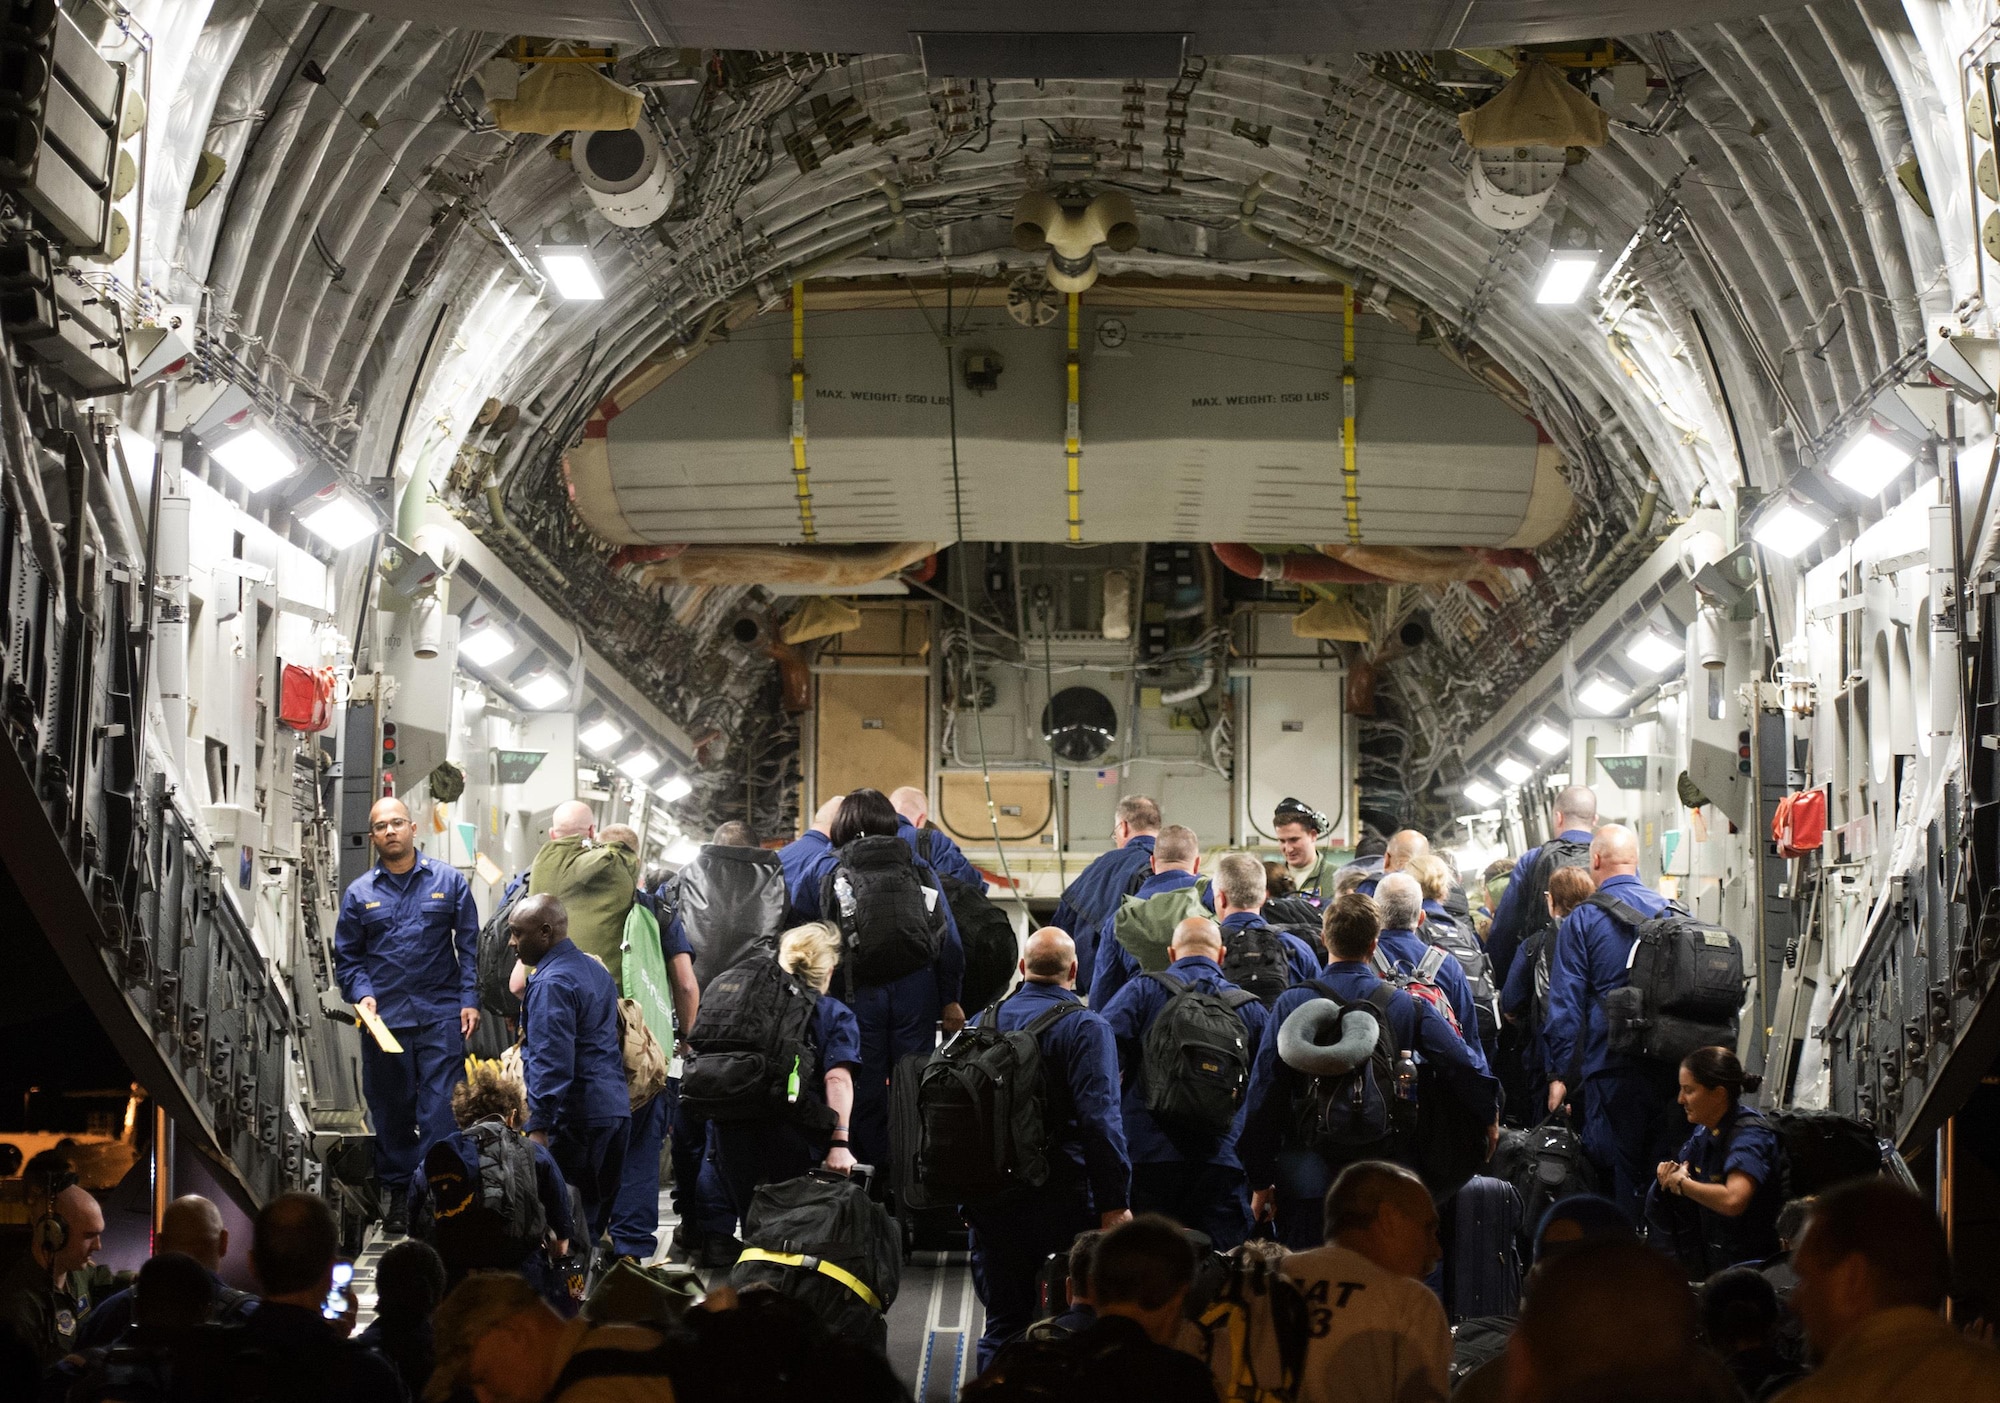 Air Mobility Command C-17s and crews from Joint Base Charleston, S.C., prepare to depart from Washington Dulles International Airport Sept. 9, 2017, to support a tasking from the U.S. Department Health and Human Services to transport approximately 300 healthcare professionals to Orlando International Airport in preparation for Hurricane Irma disaster response operations. This mission will give reach to the hands that heal. (U.S. Air Force photo/Senior Airman Rusty Frank/Released)